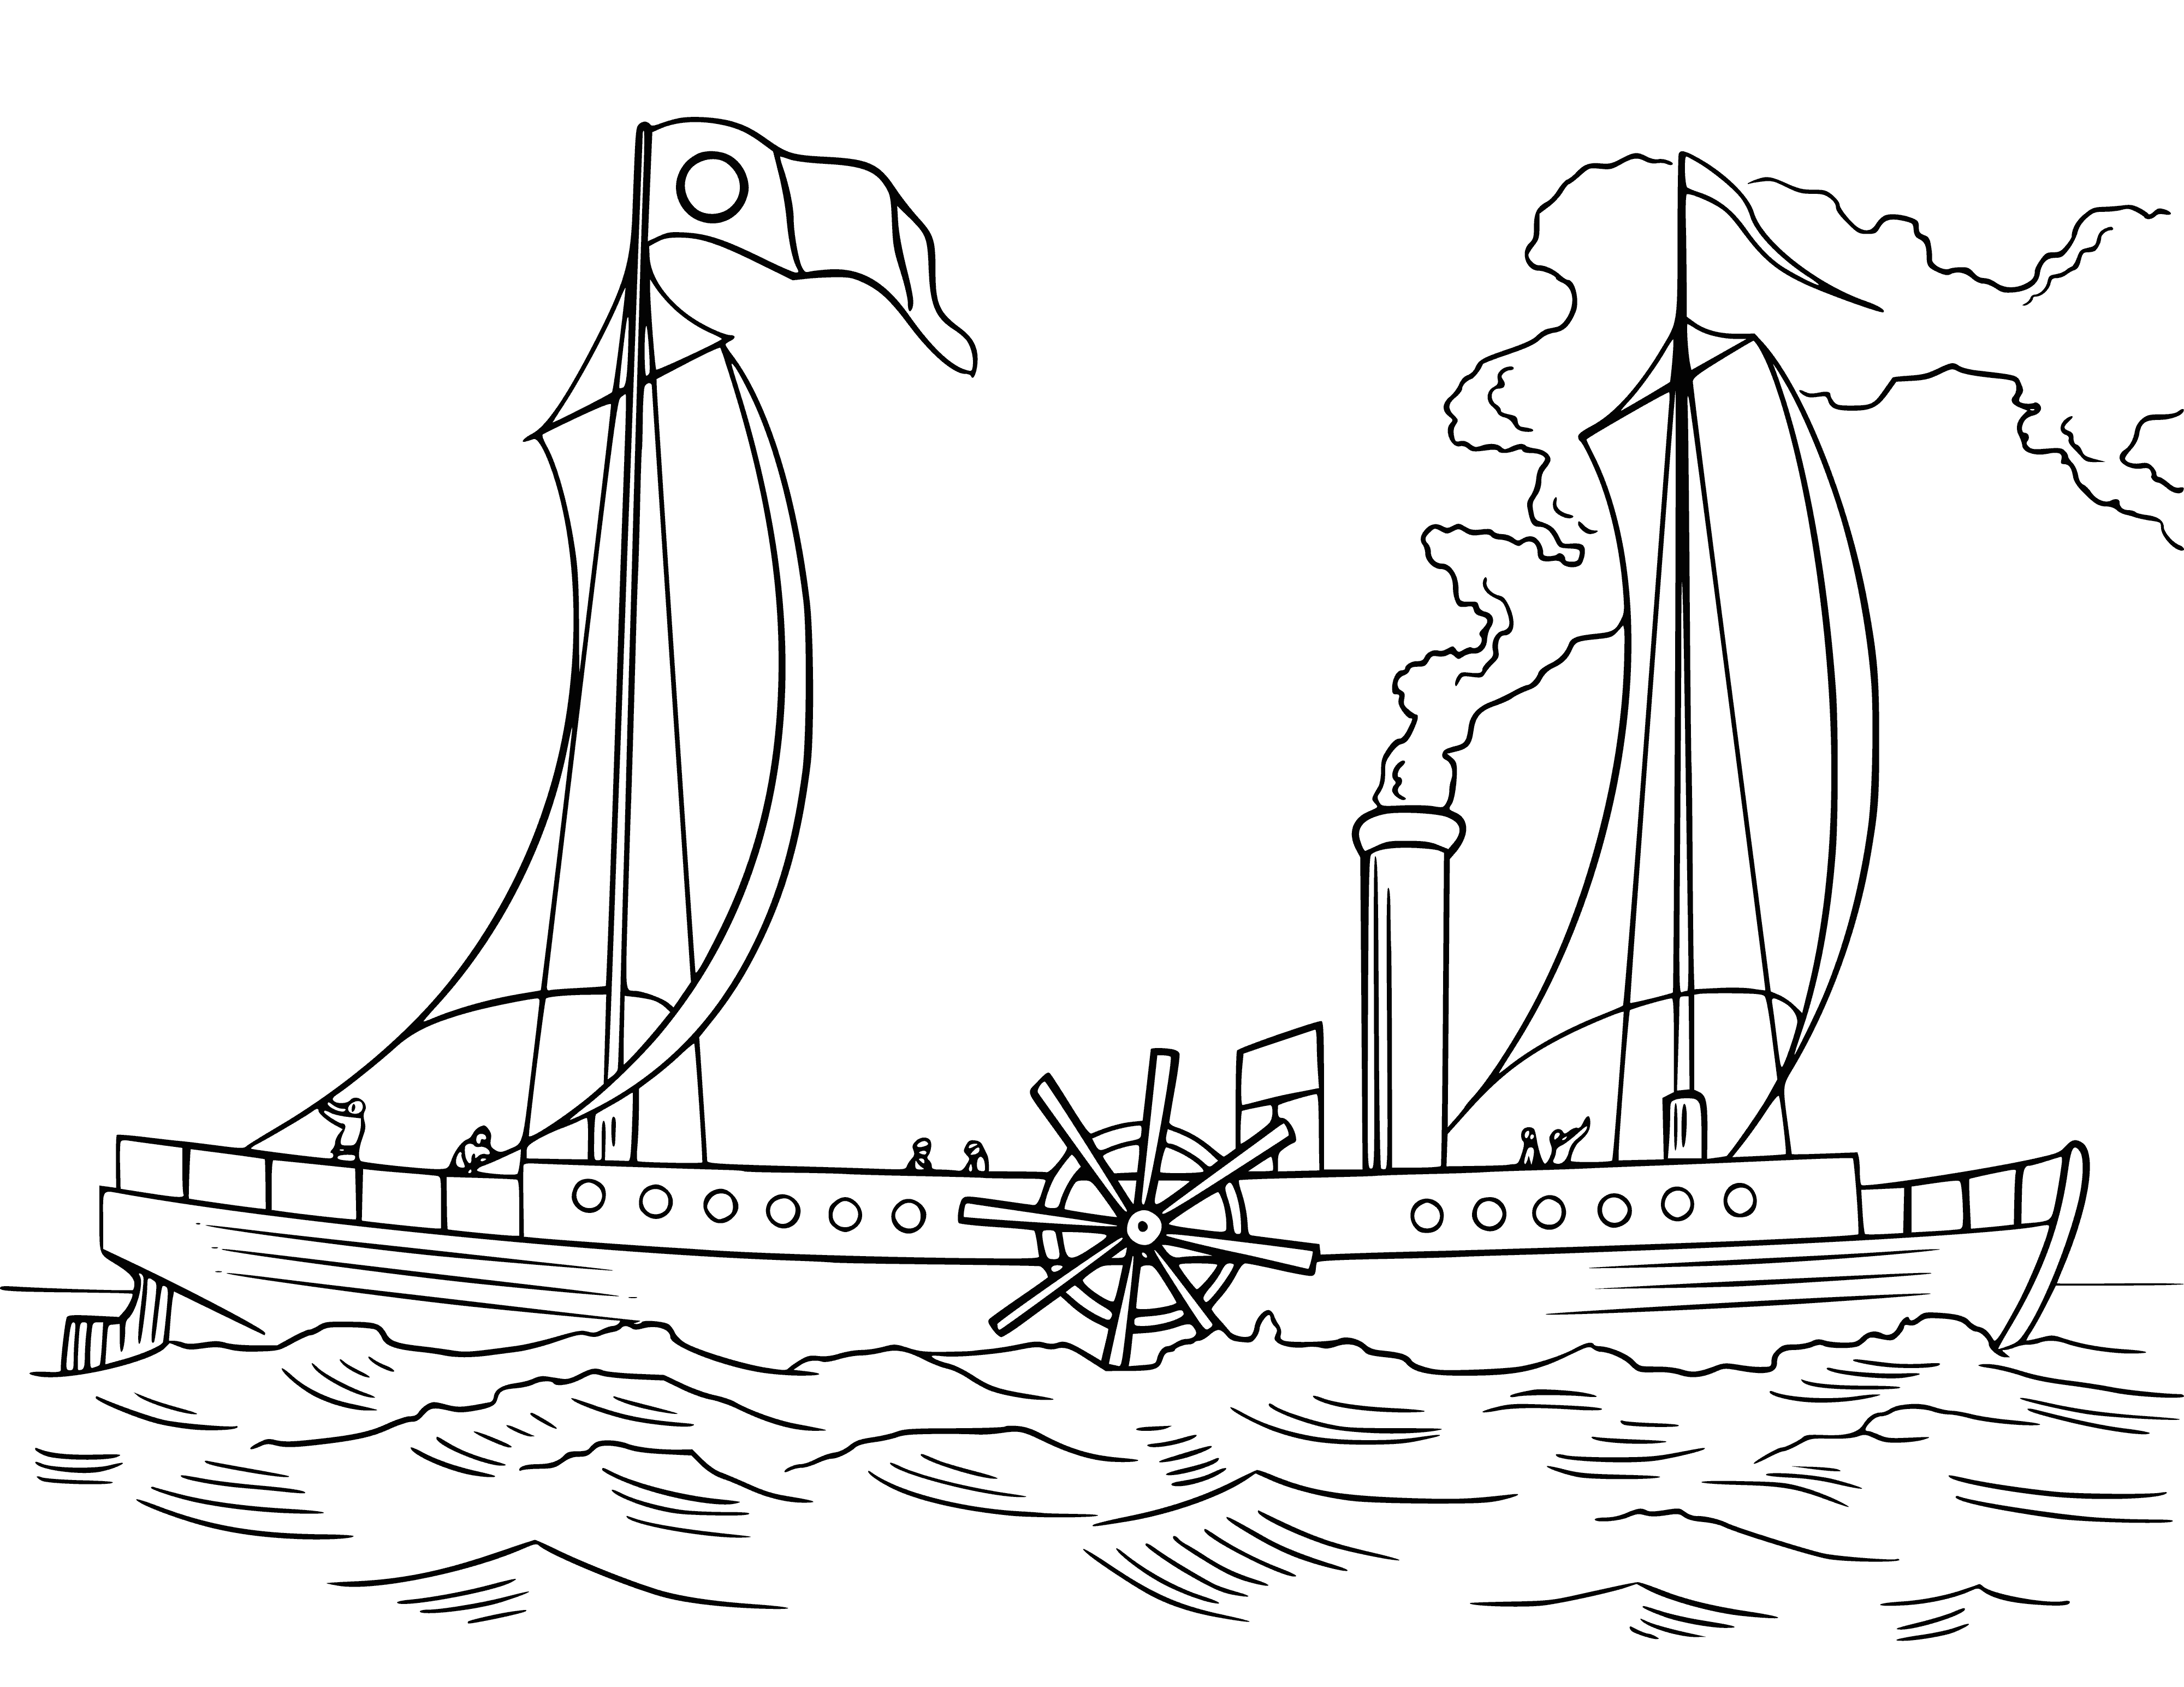 coloring page: Ships and sailboats galore! A large steamship with its chimneys a-puffin' and a village in the distance.